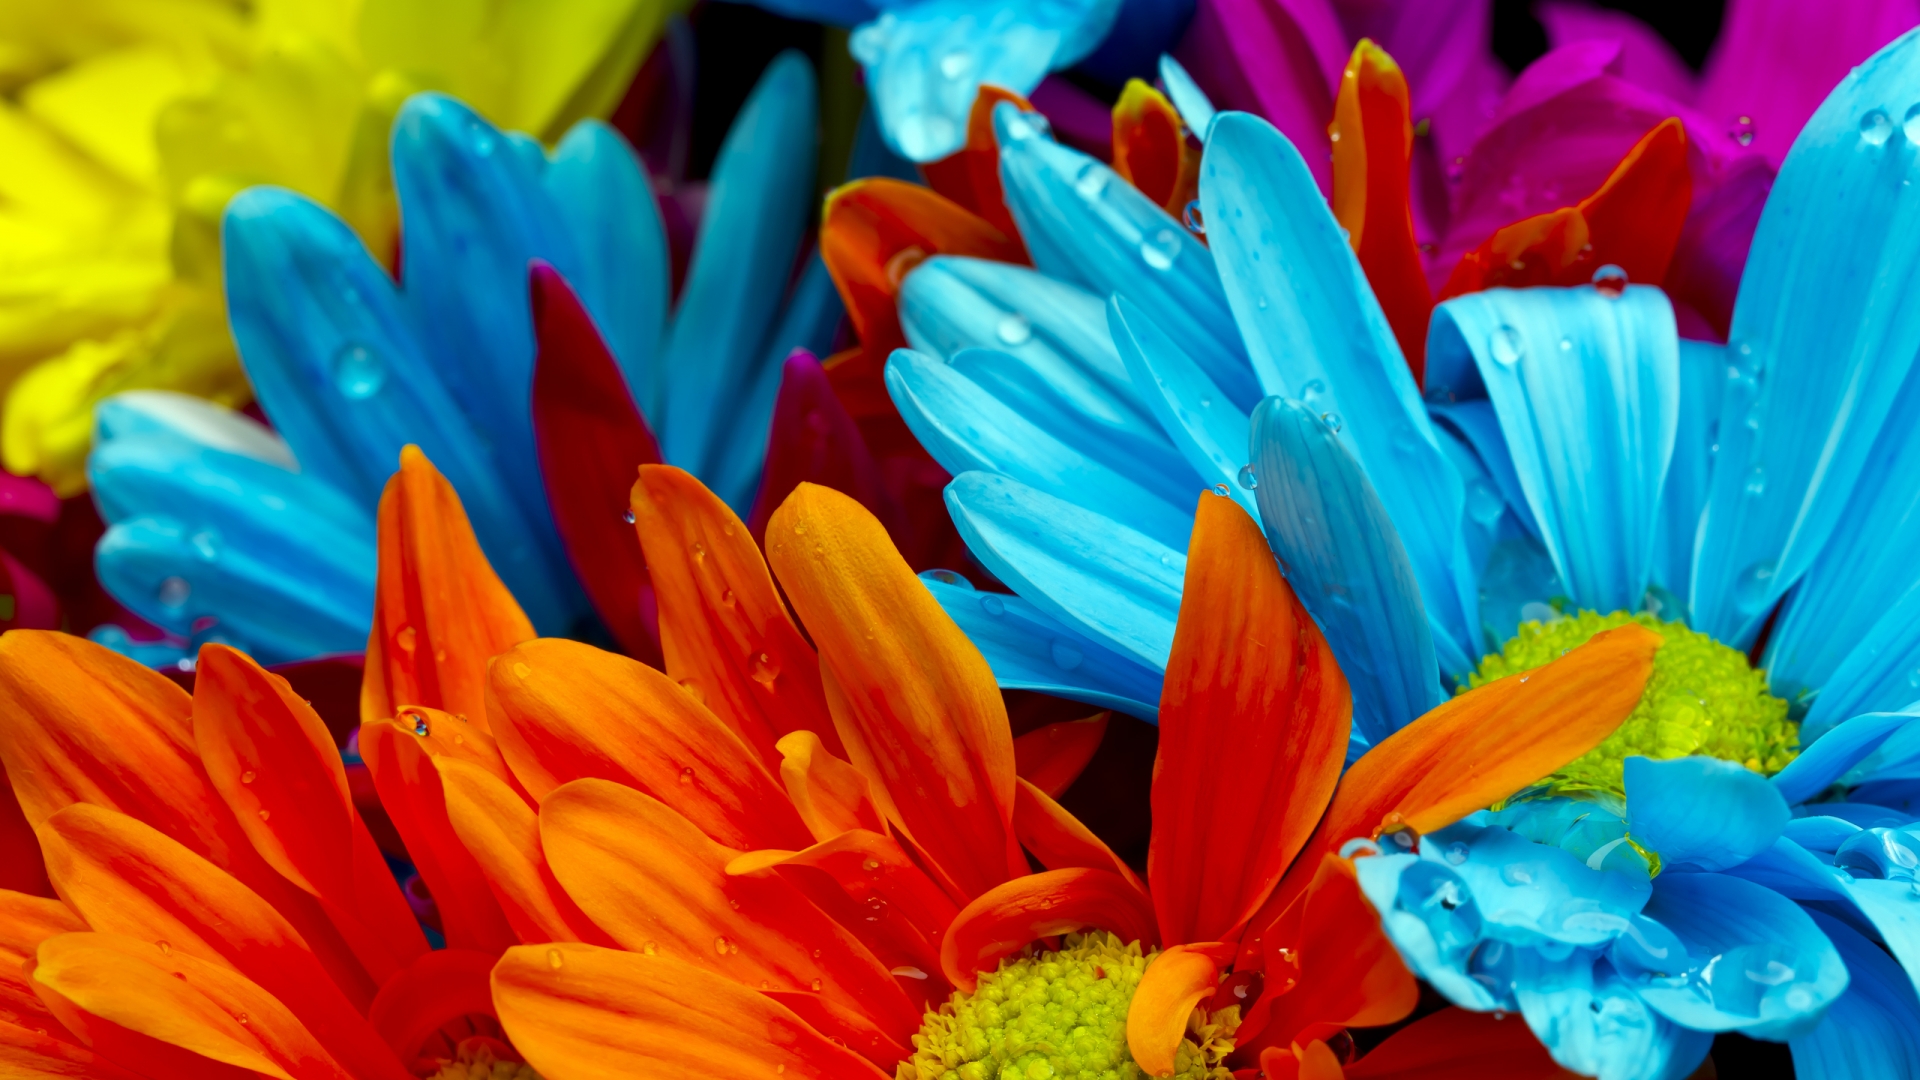 Amazing Flower Colors for 1920 x 1080 HDTV 1080p resolution